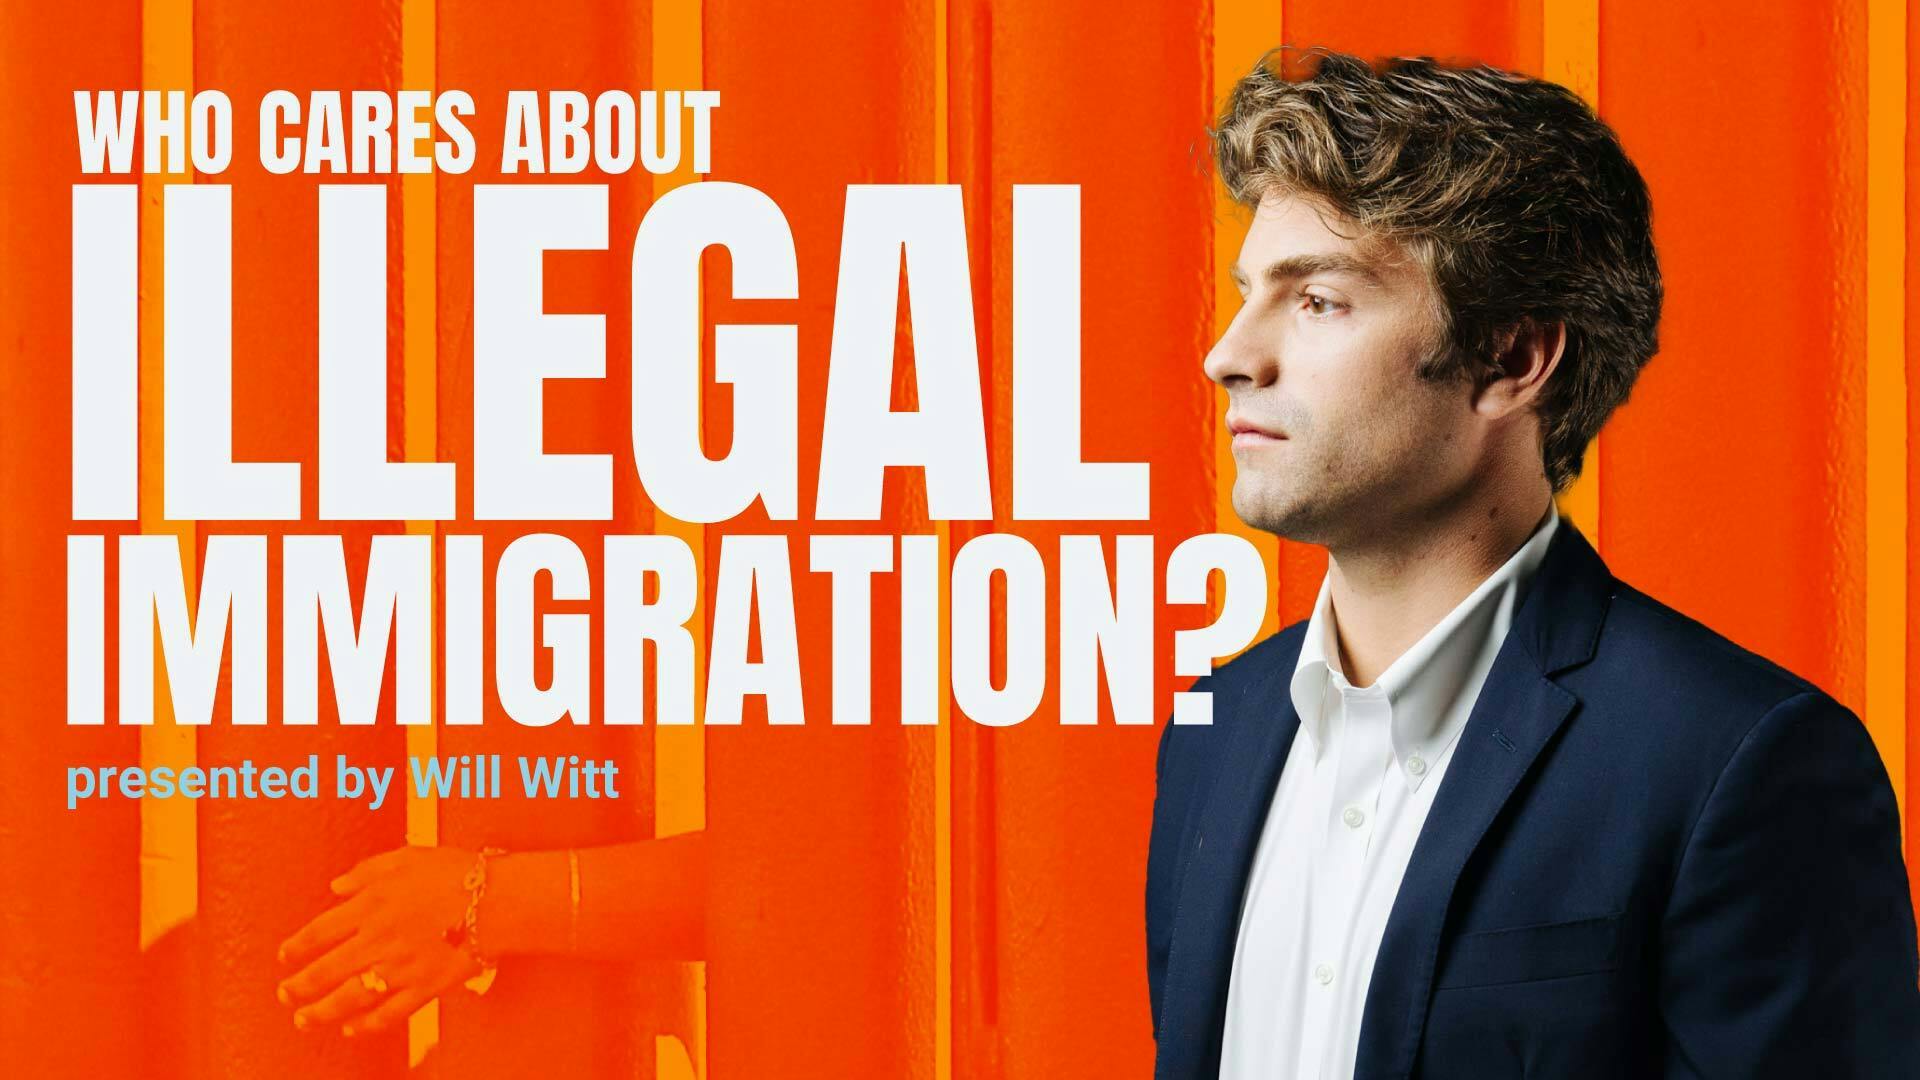 Who Cares about Illegal Immigration?